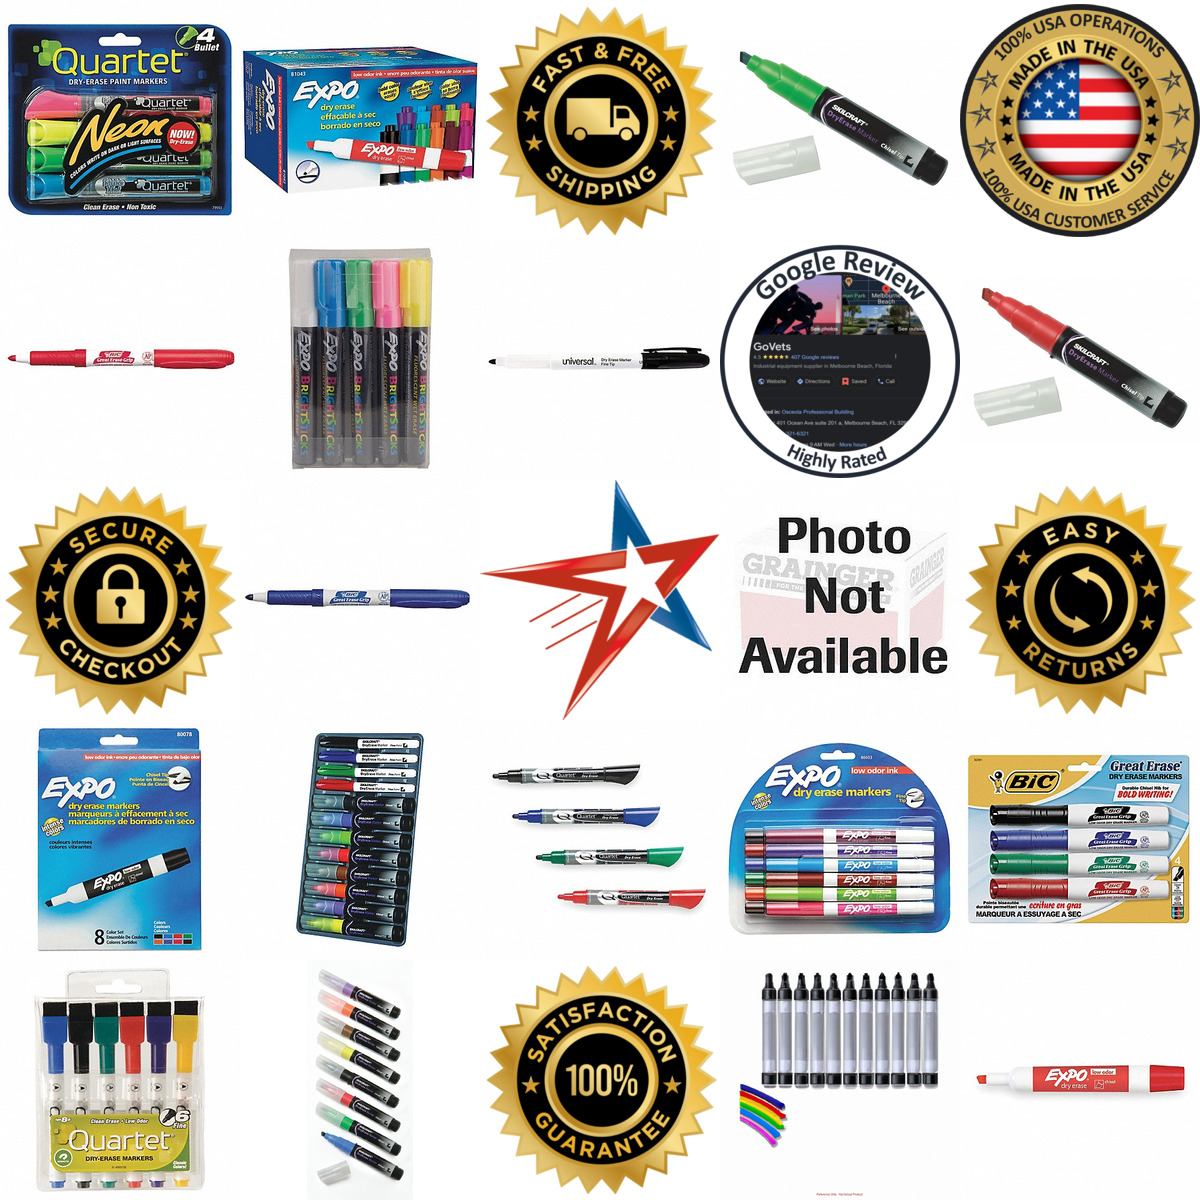 A selection of Wet and Dry Erase Markers products on GoVets